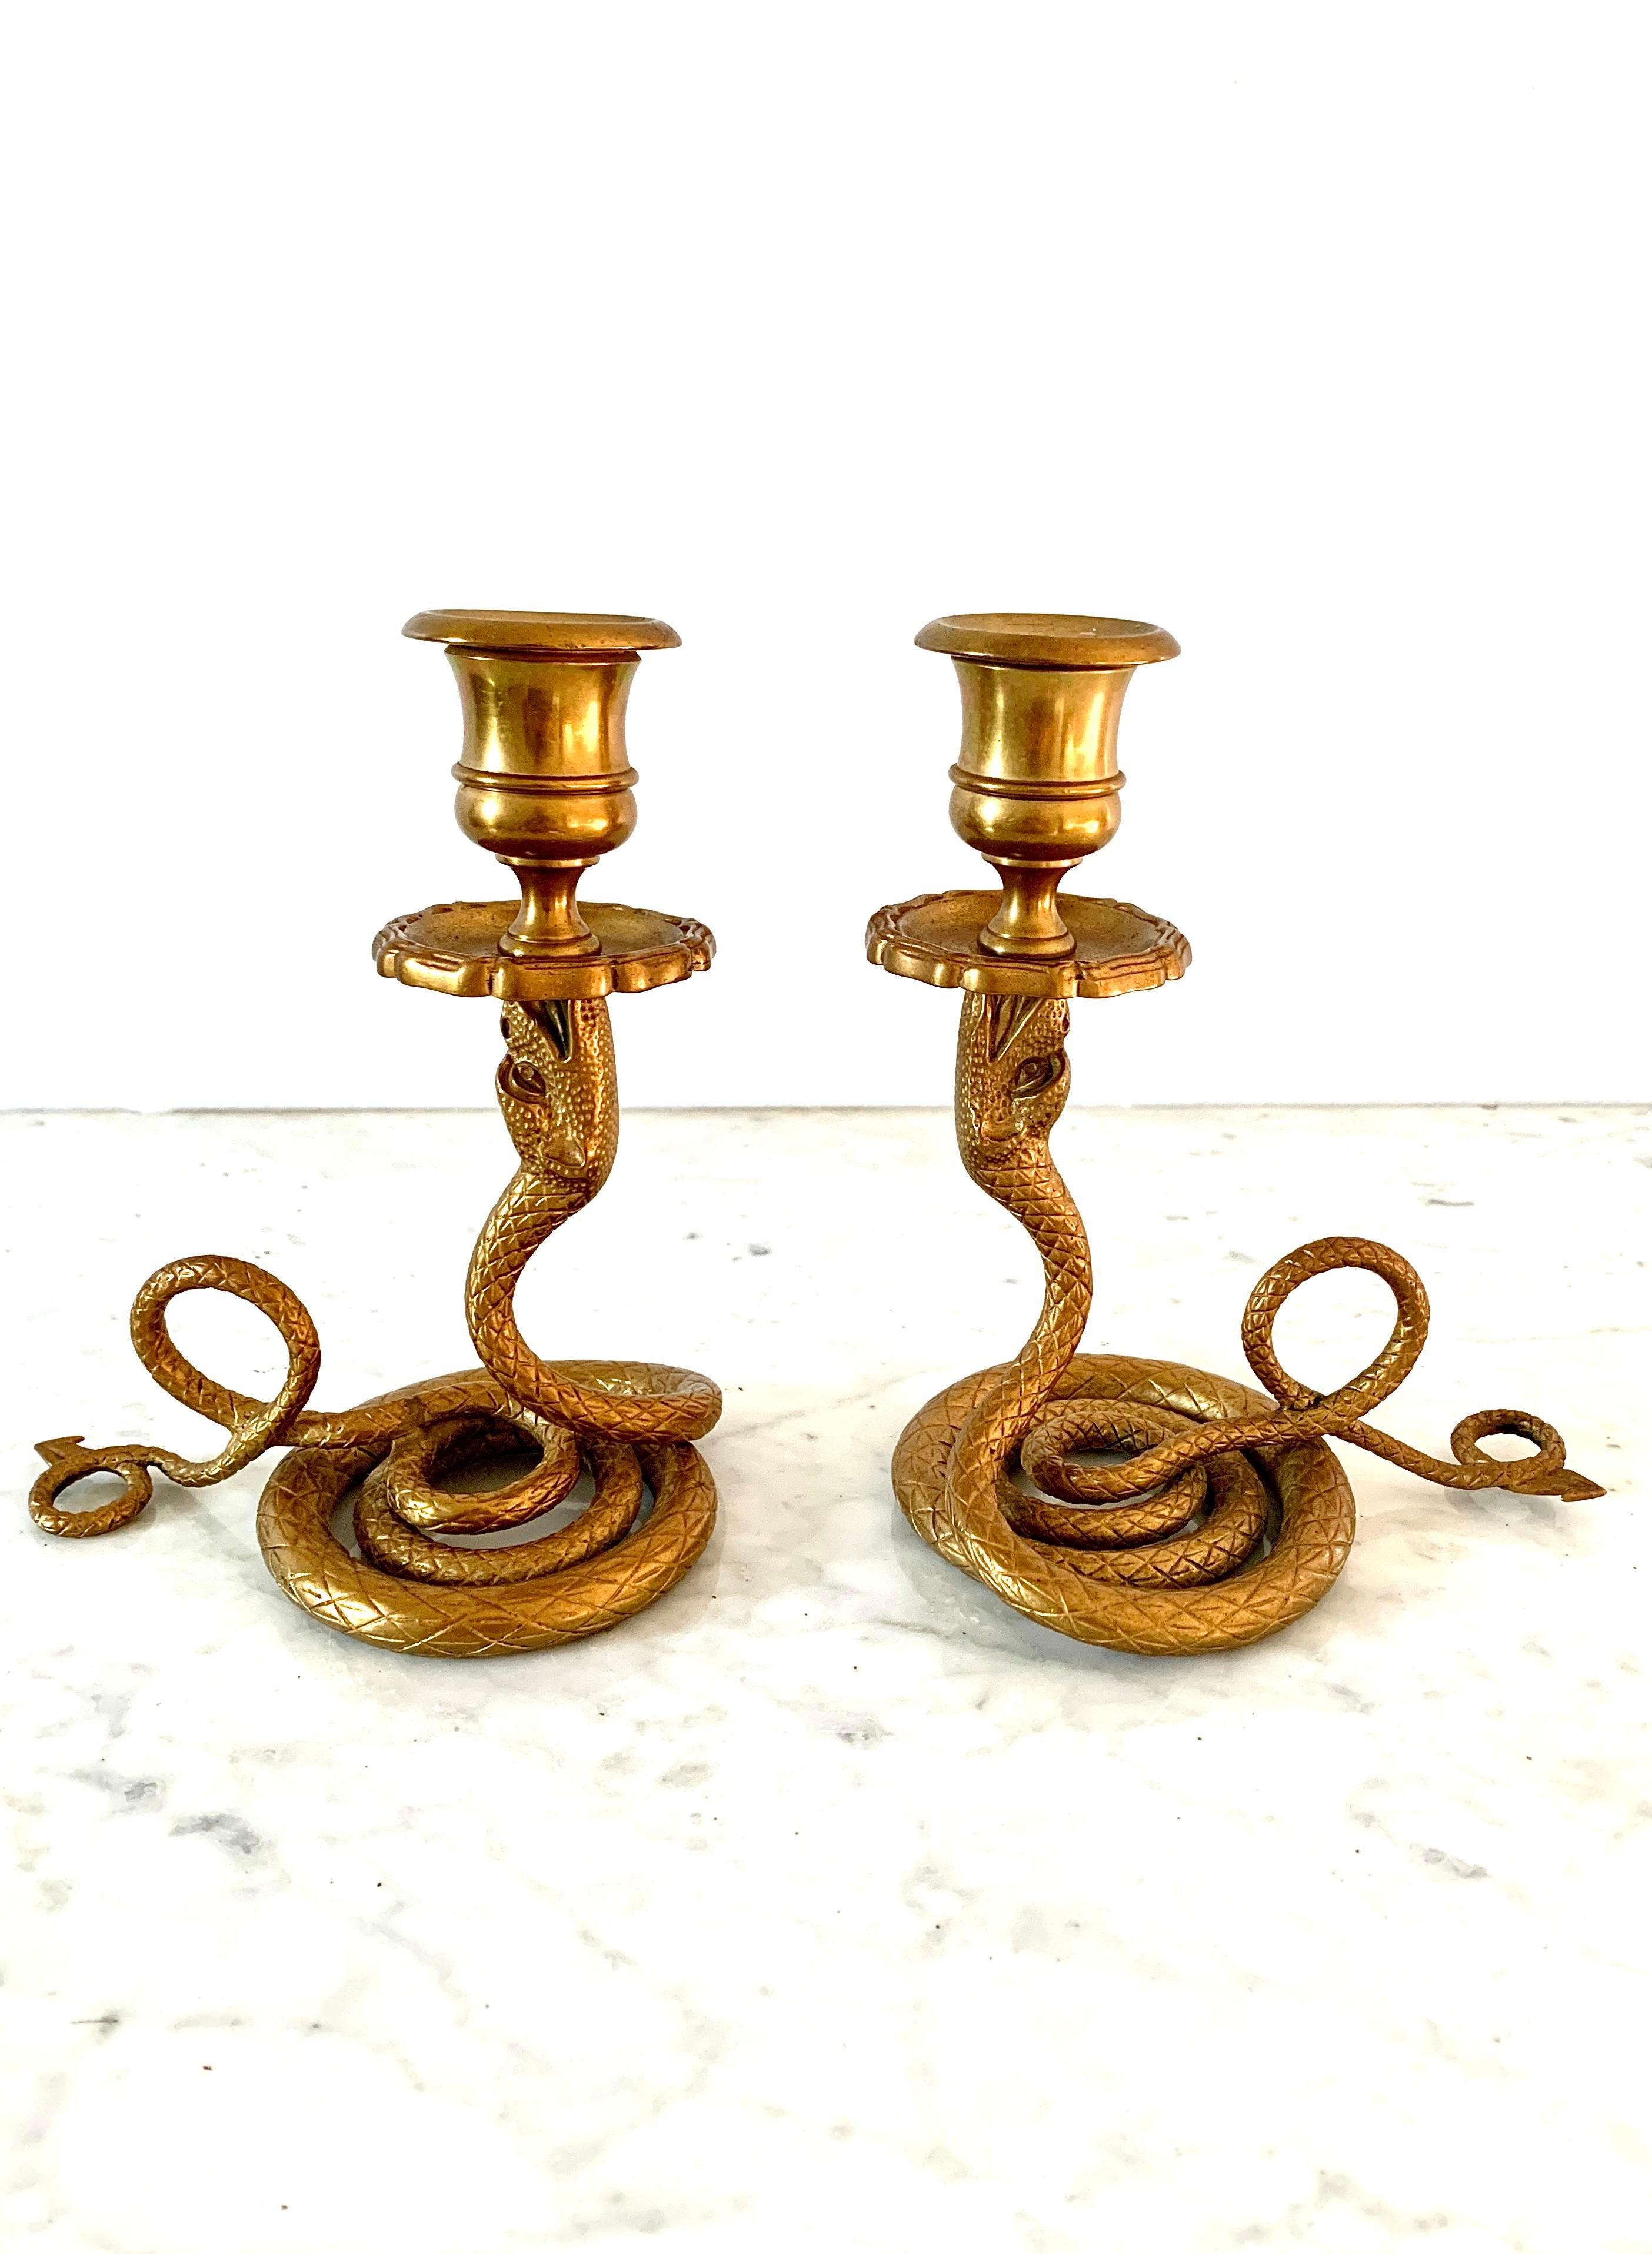 A wonderful pair of Art Deco brass snake candle holders.

France, Circa 1920s.

Measures: 6